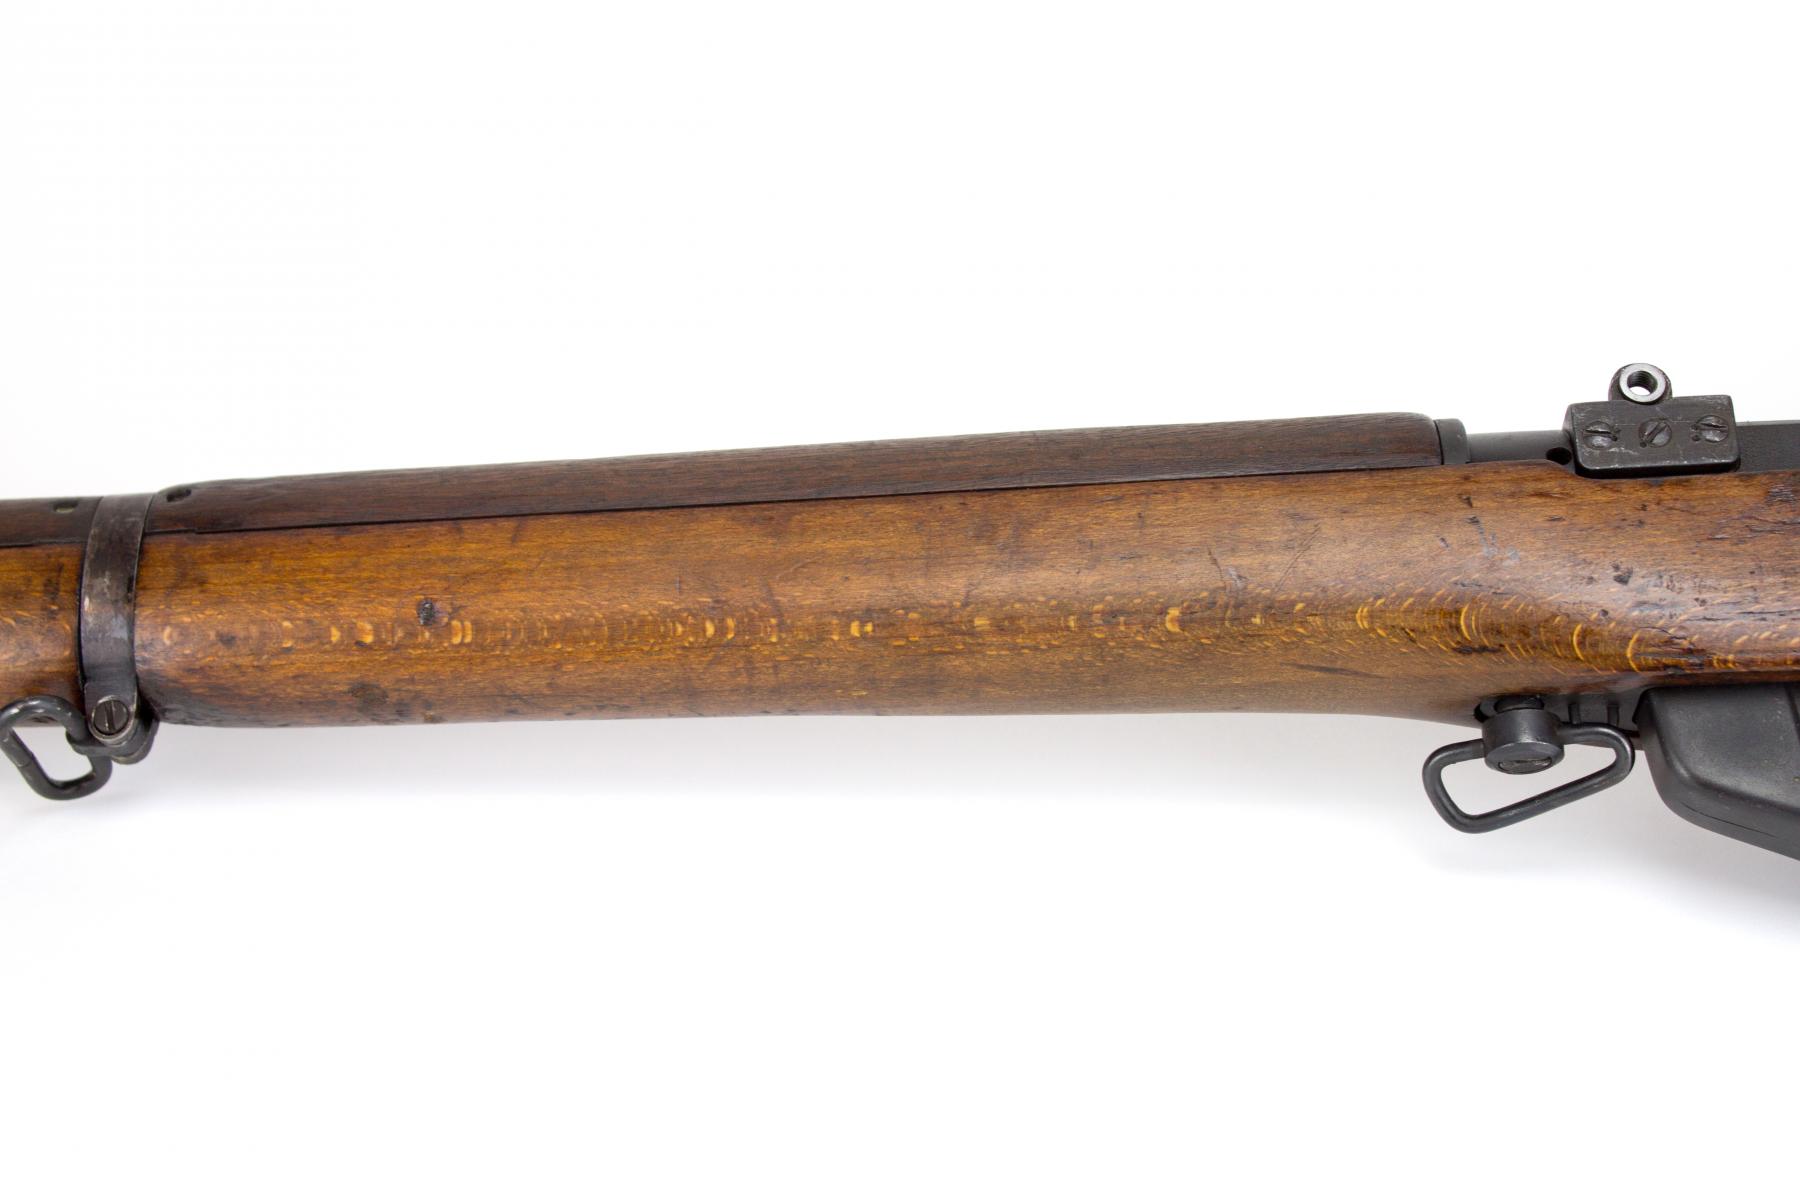 I Have This Old Gun: British Lee-Enfield No. 4 (T) Sniper Rifle